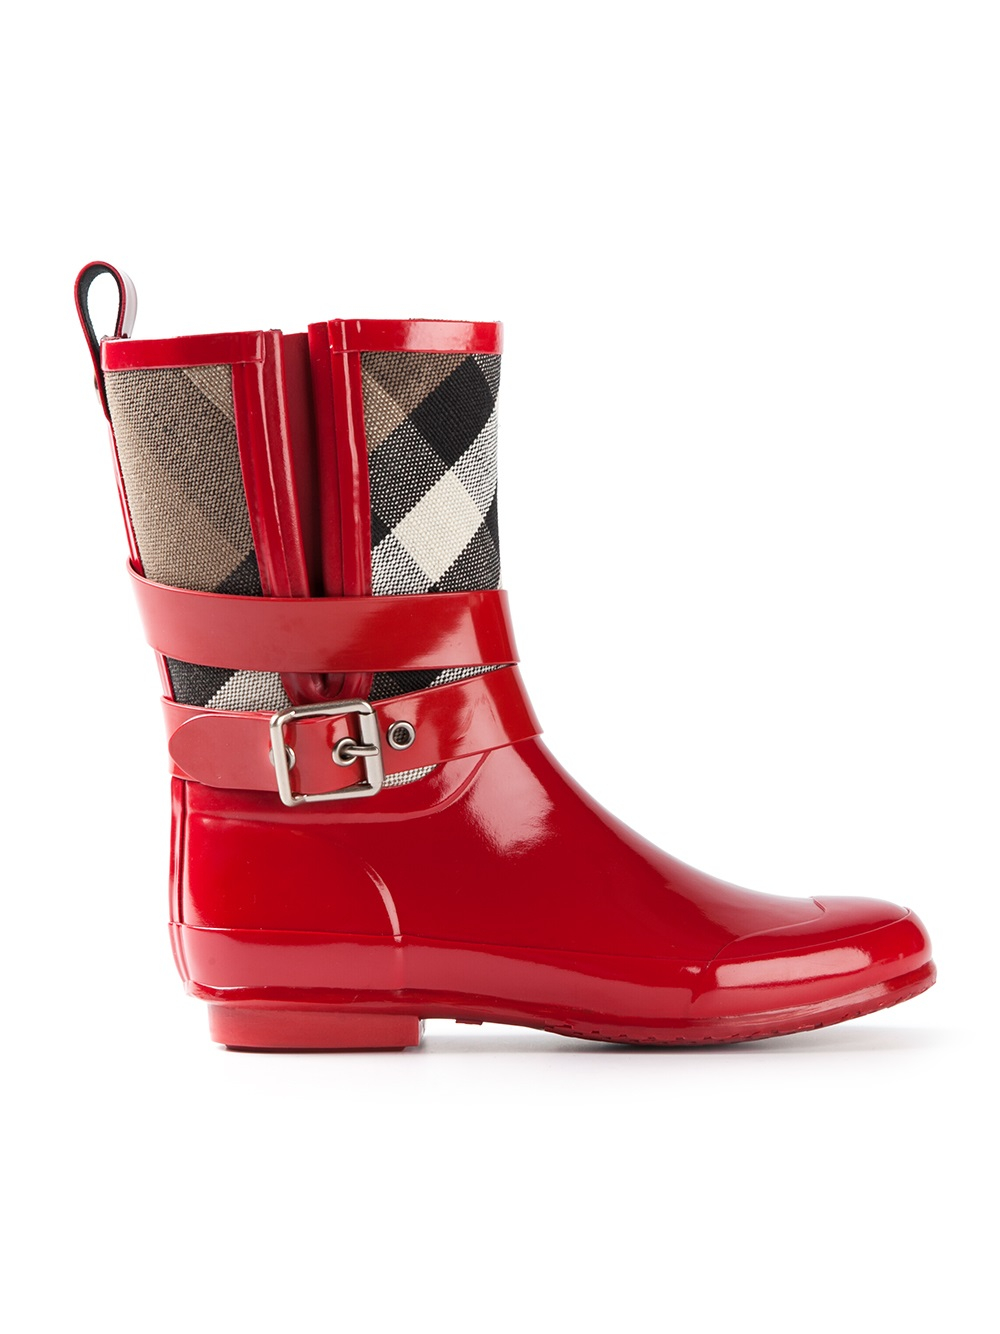 Burberry Check Panel Wellington Boots in Red - Lyst